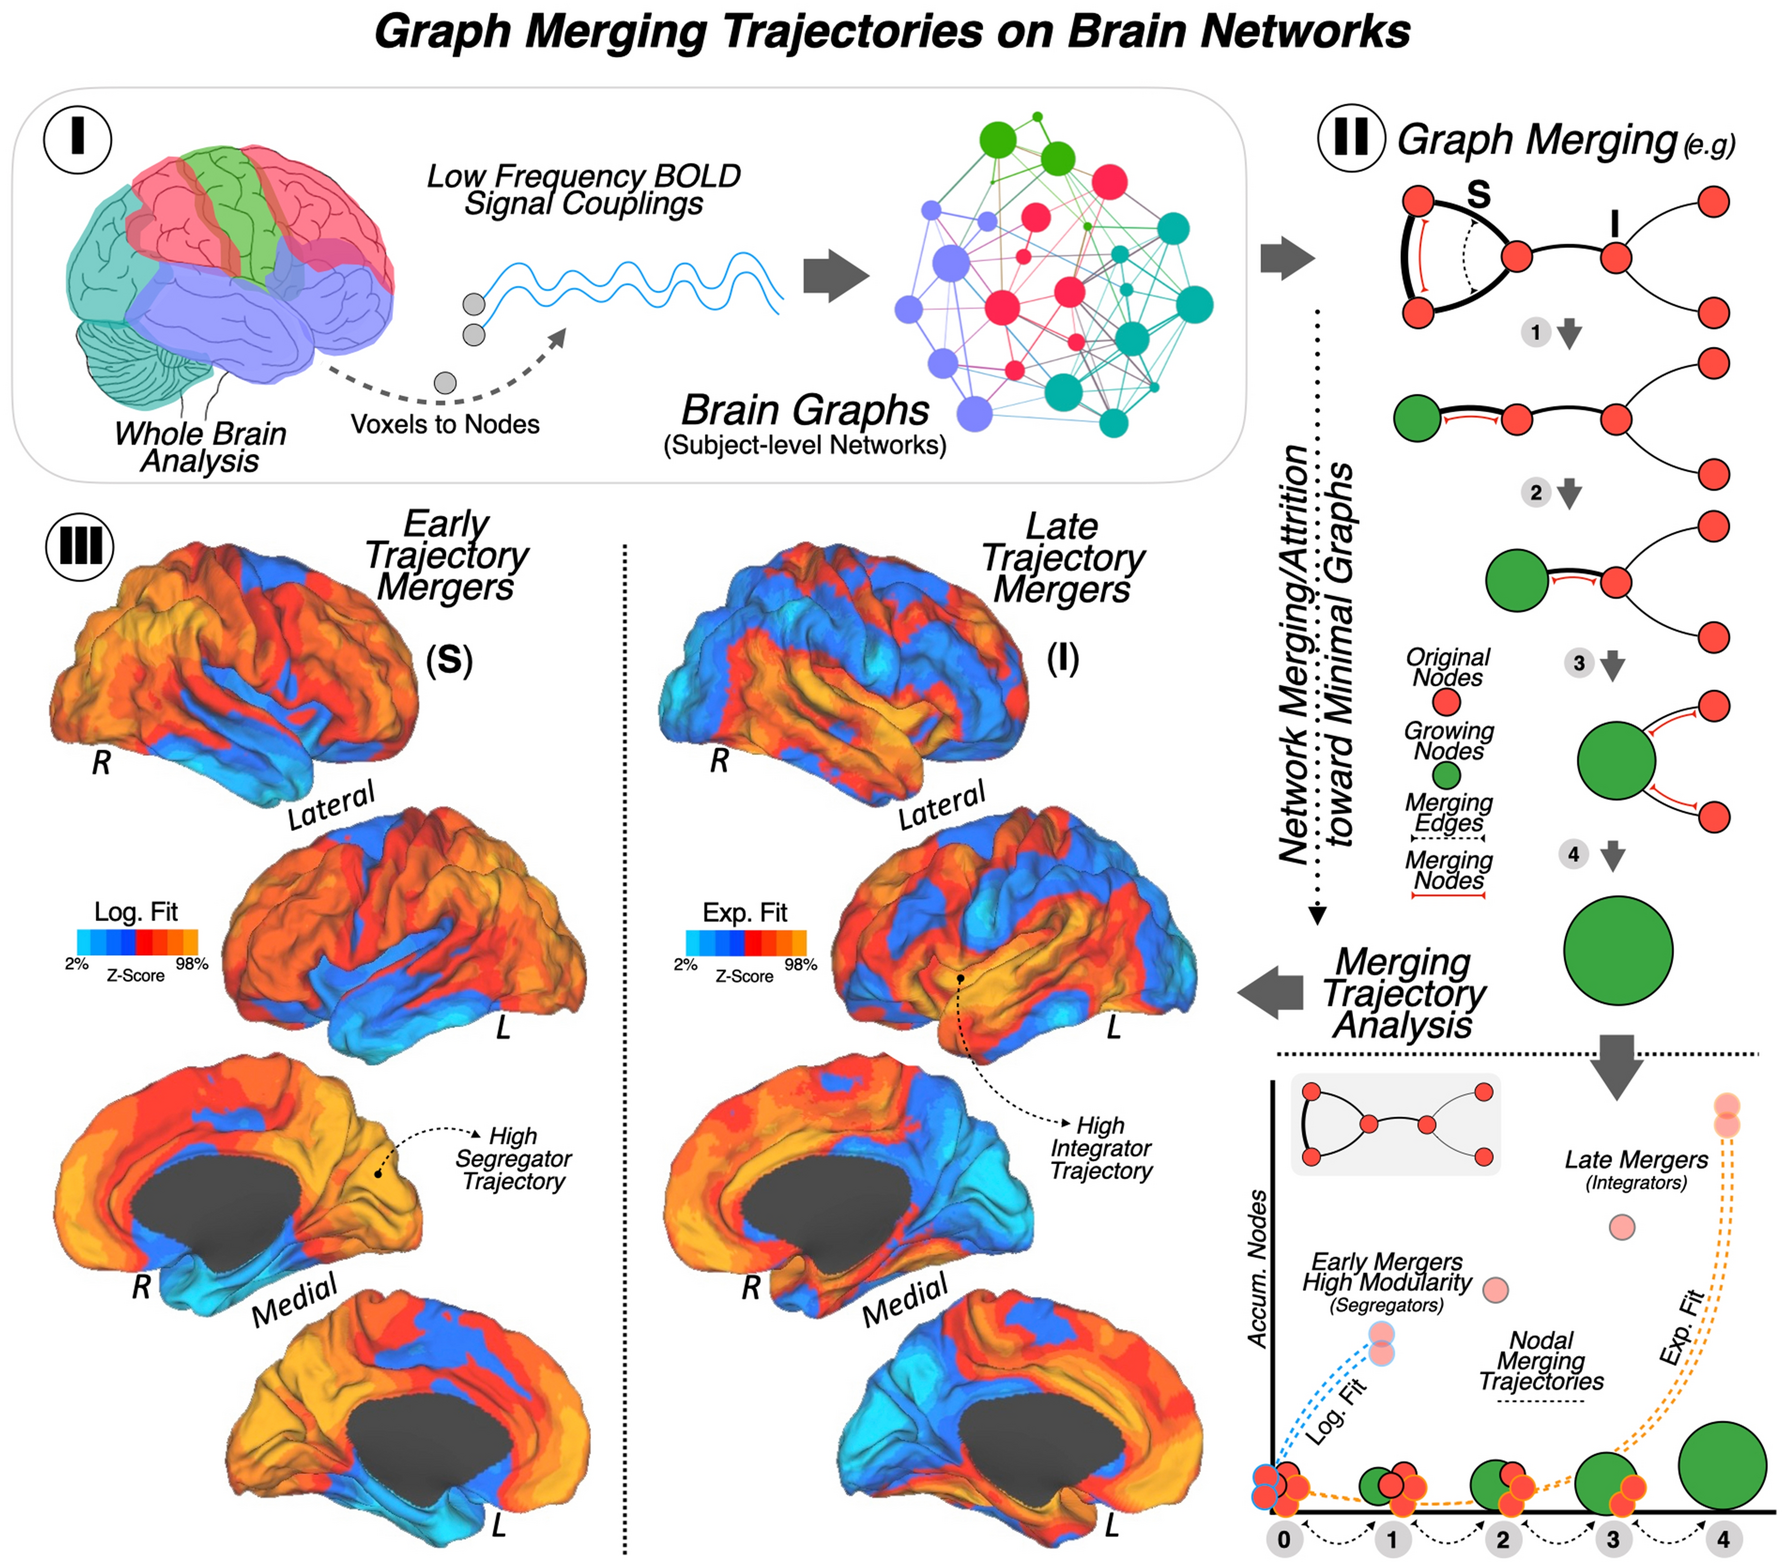 Divergent connectomic organization delineates genetic evolutionary traits  in the human brain | Scientific Reports